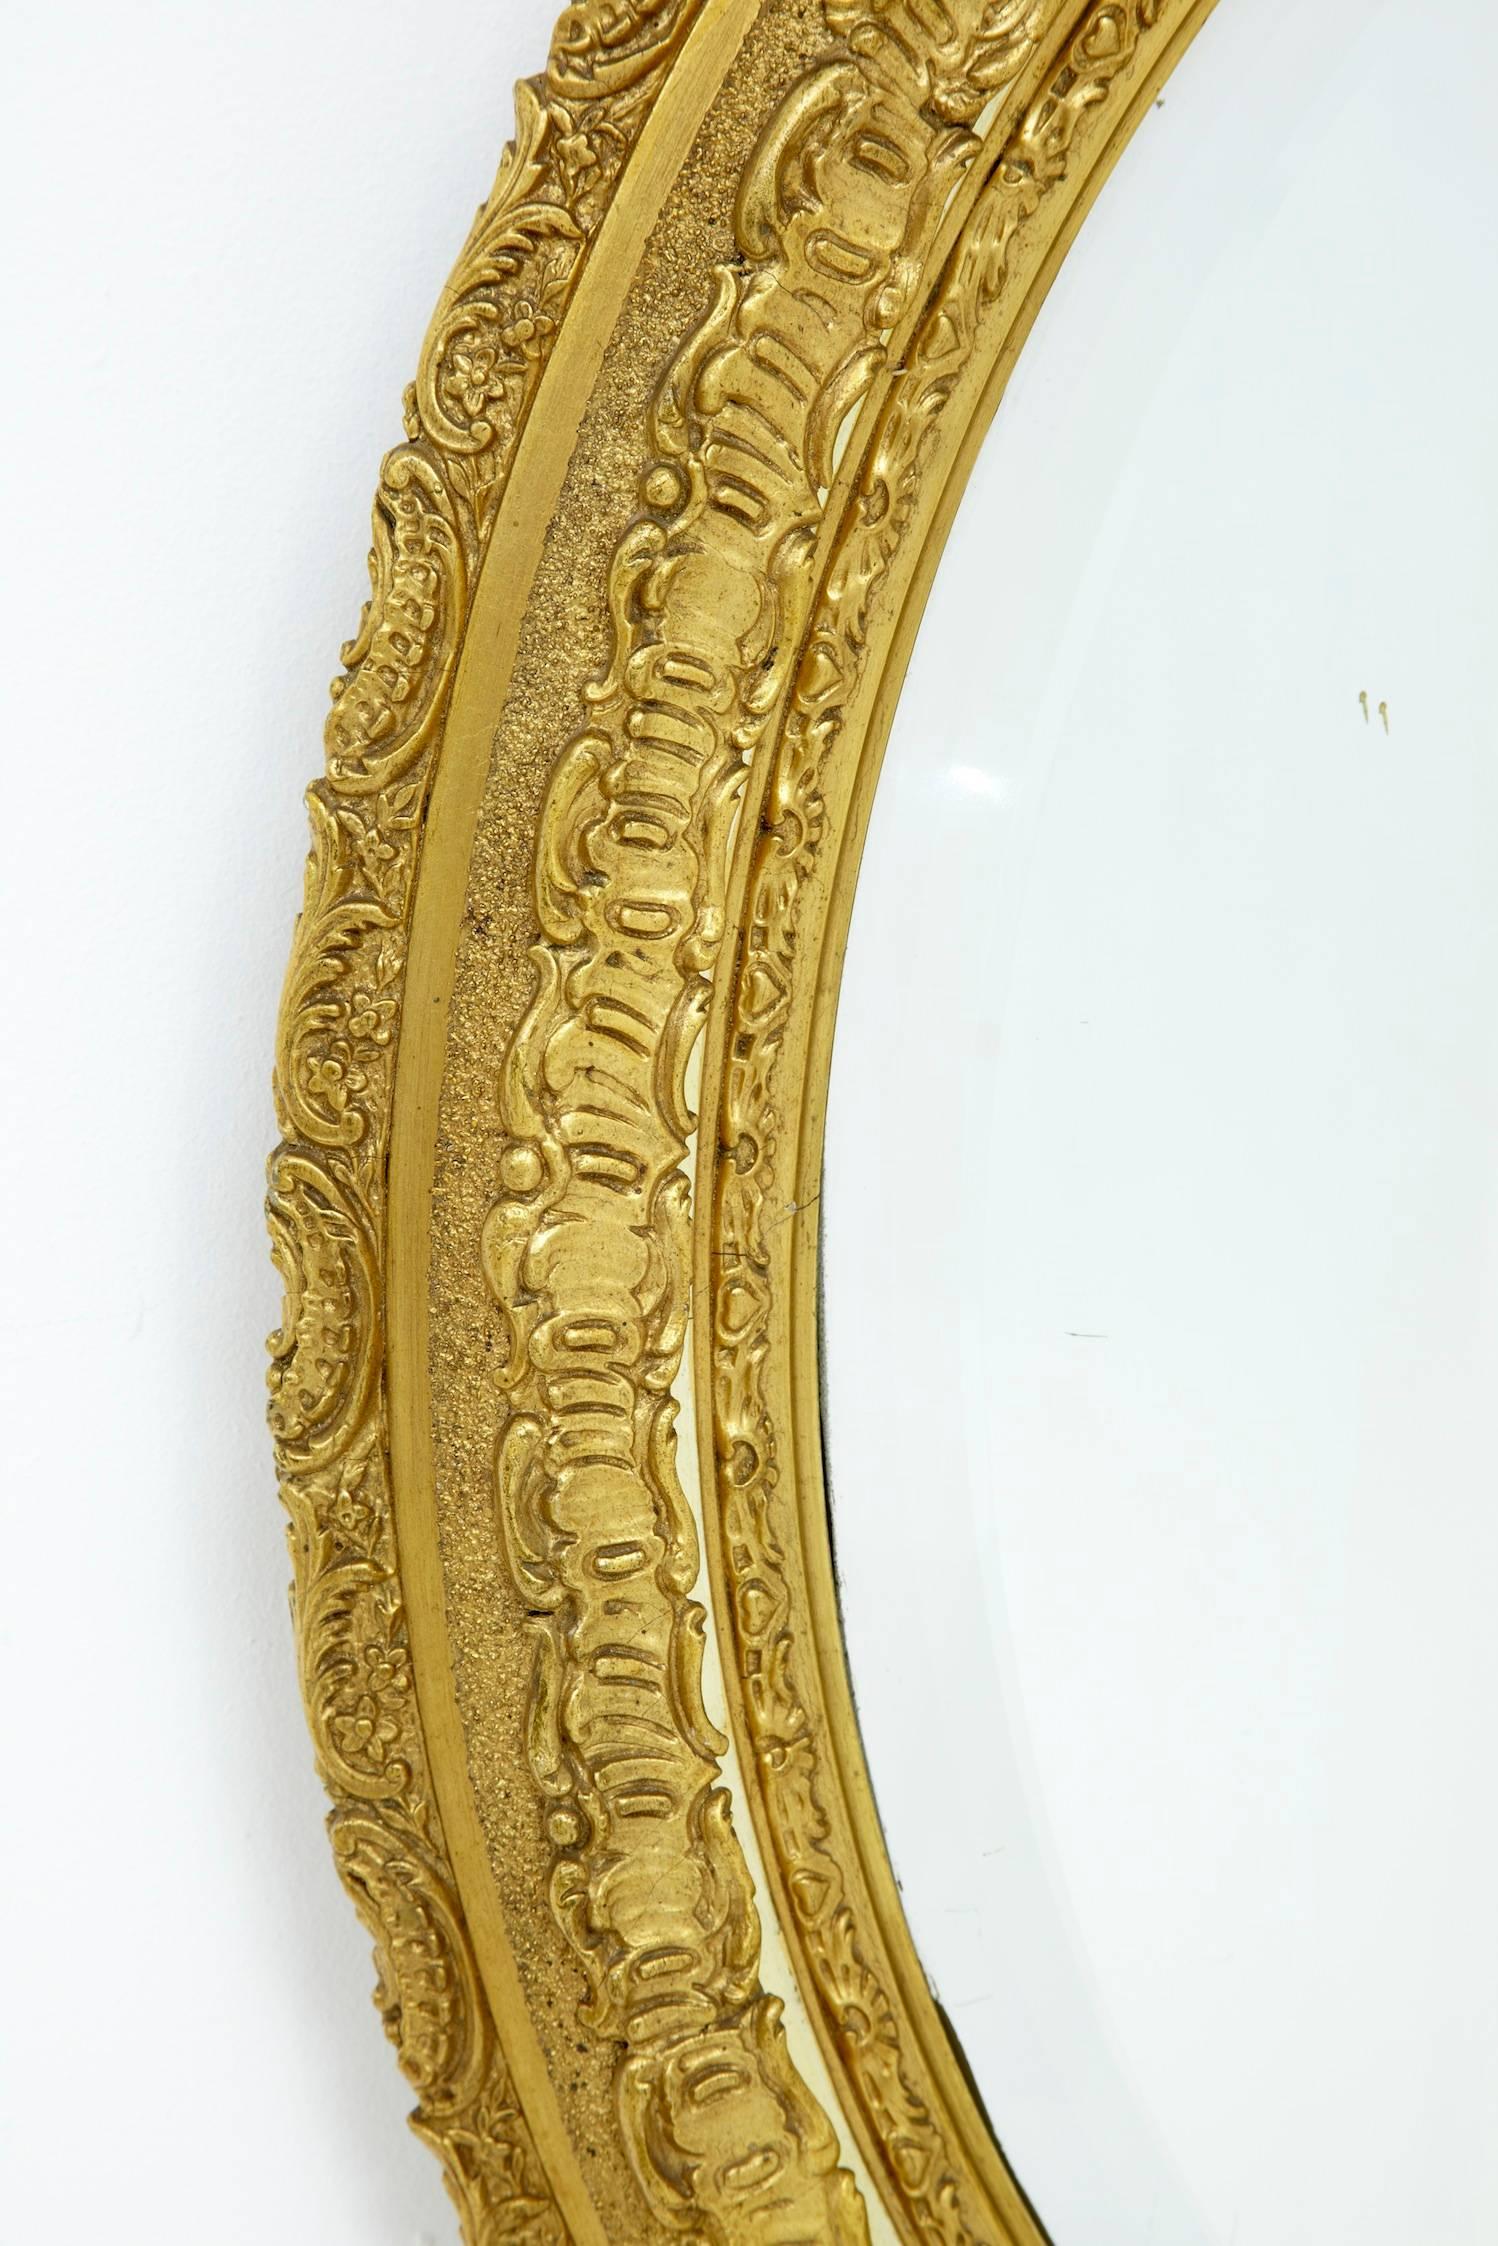 Beautiful carved ornate oval mirror, bevelled edge, circa 1870.
Some repairs and restoration to gilding.